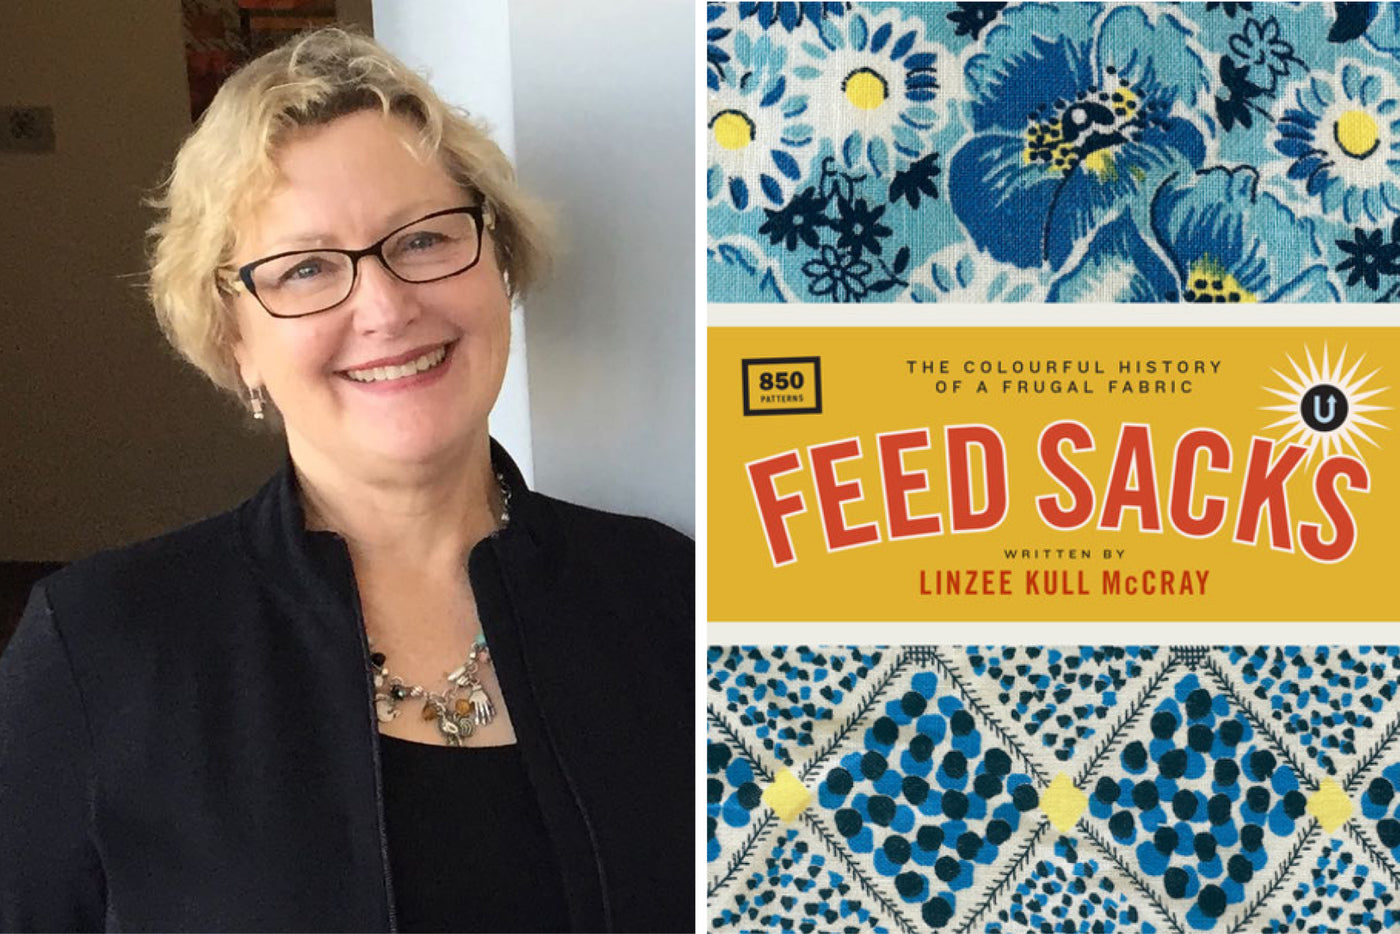 Linzee Kull McCray, author of Feed Sacks, a Frugal Fabric